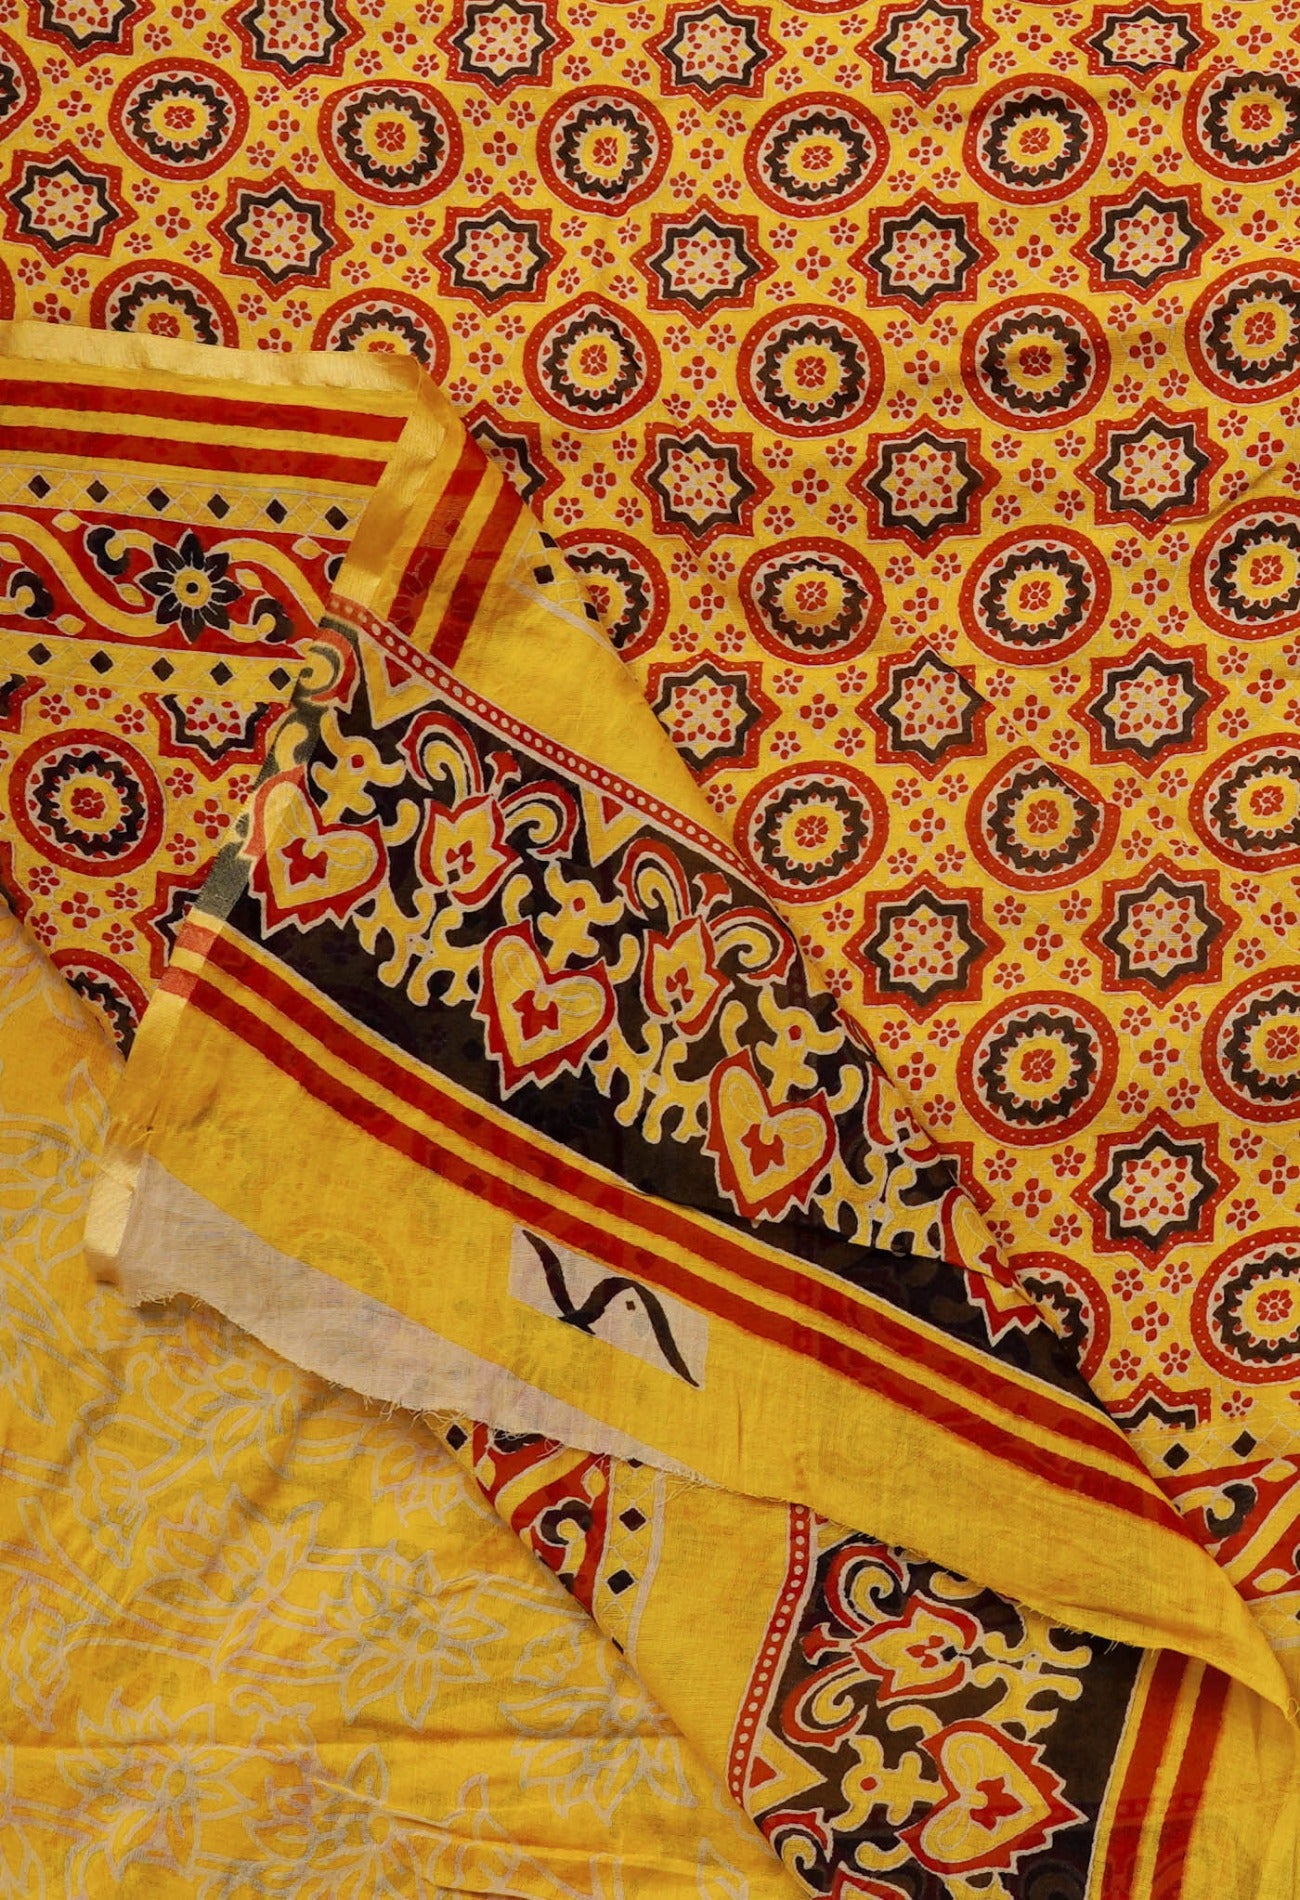 Online Shopping for Yellow Pure Patola Printed Mulmul Cotton Saree with Hand Block Prints from Rajasthan at Unnatisilks.comIndia
